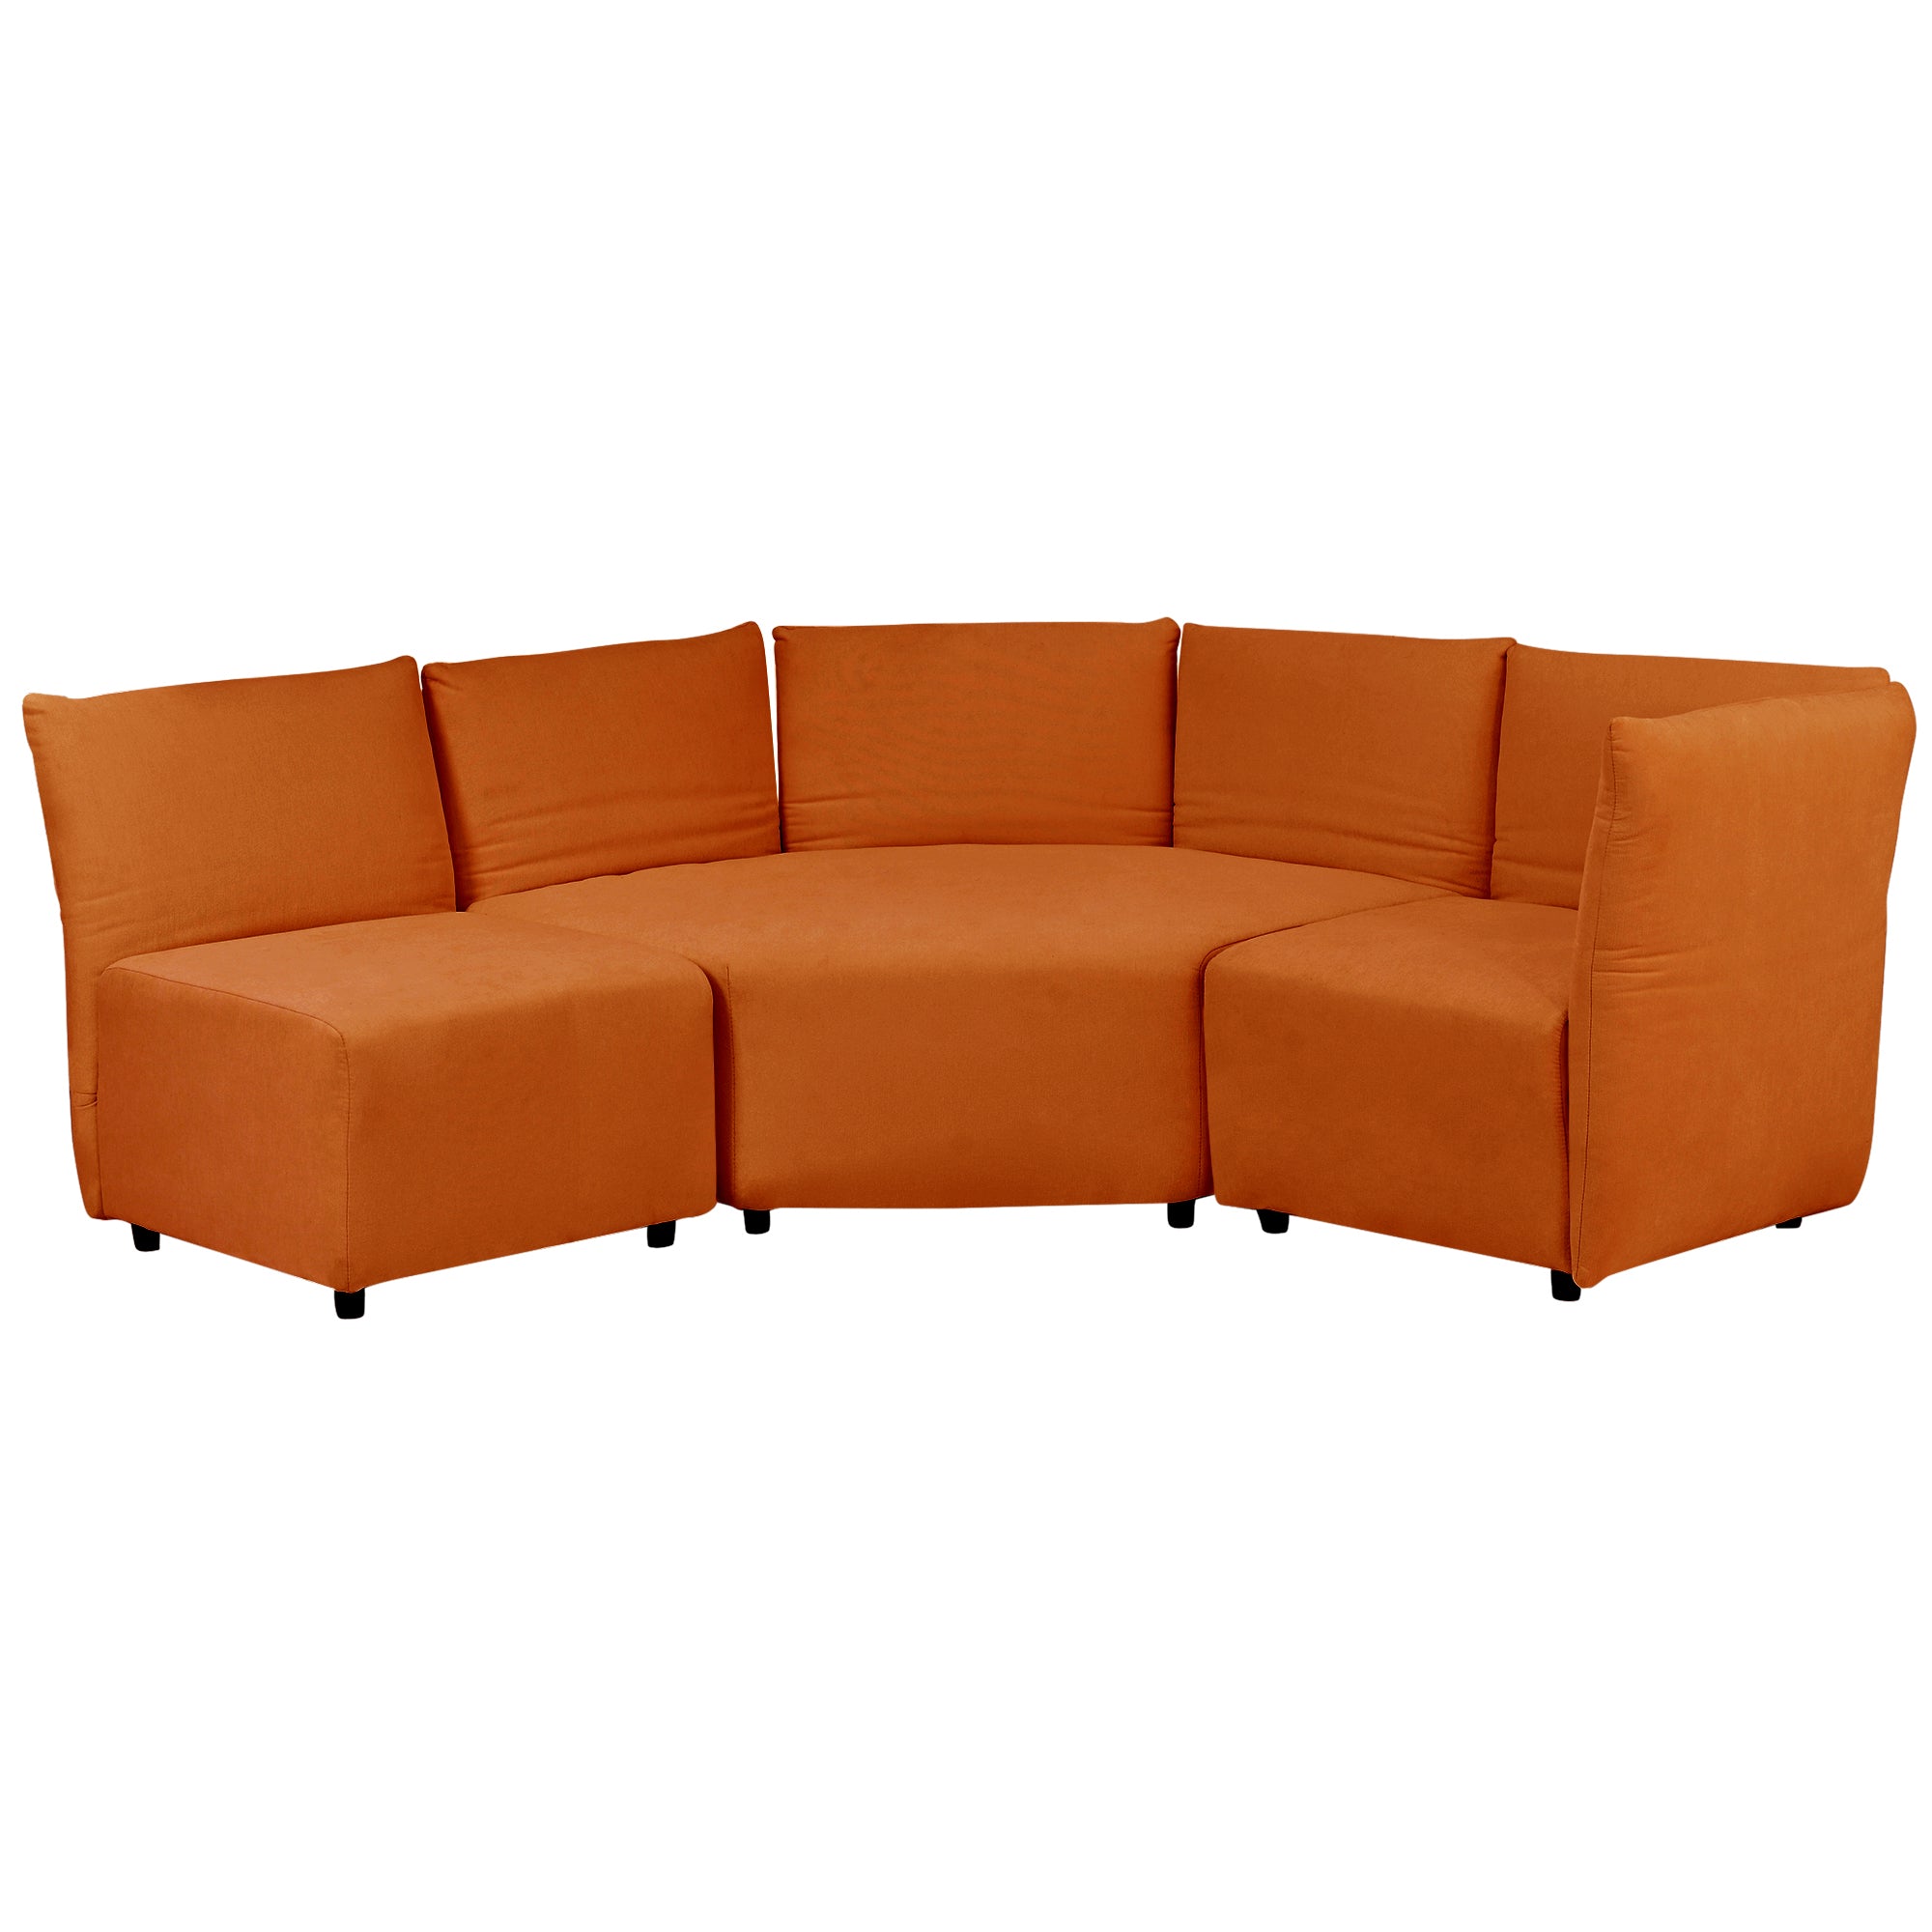 Stylish Sofa Set with Polyester Upholstery with Adjustable Back with Free Combination for Living Room - Orange